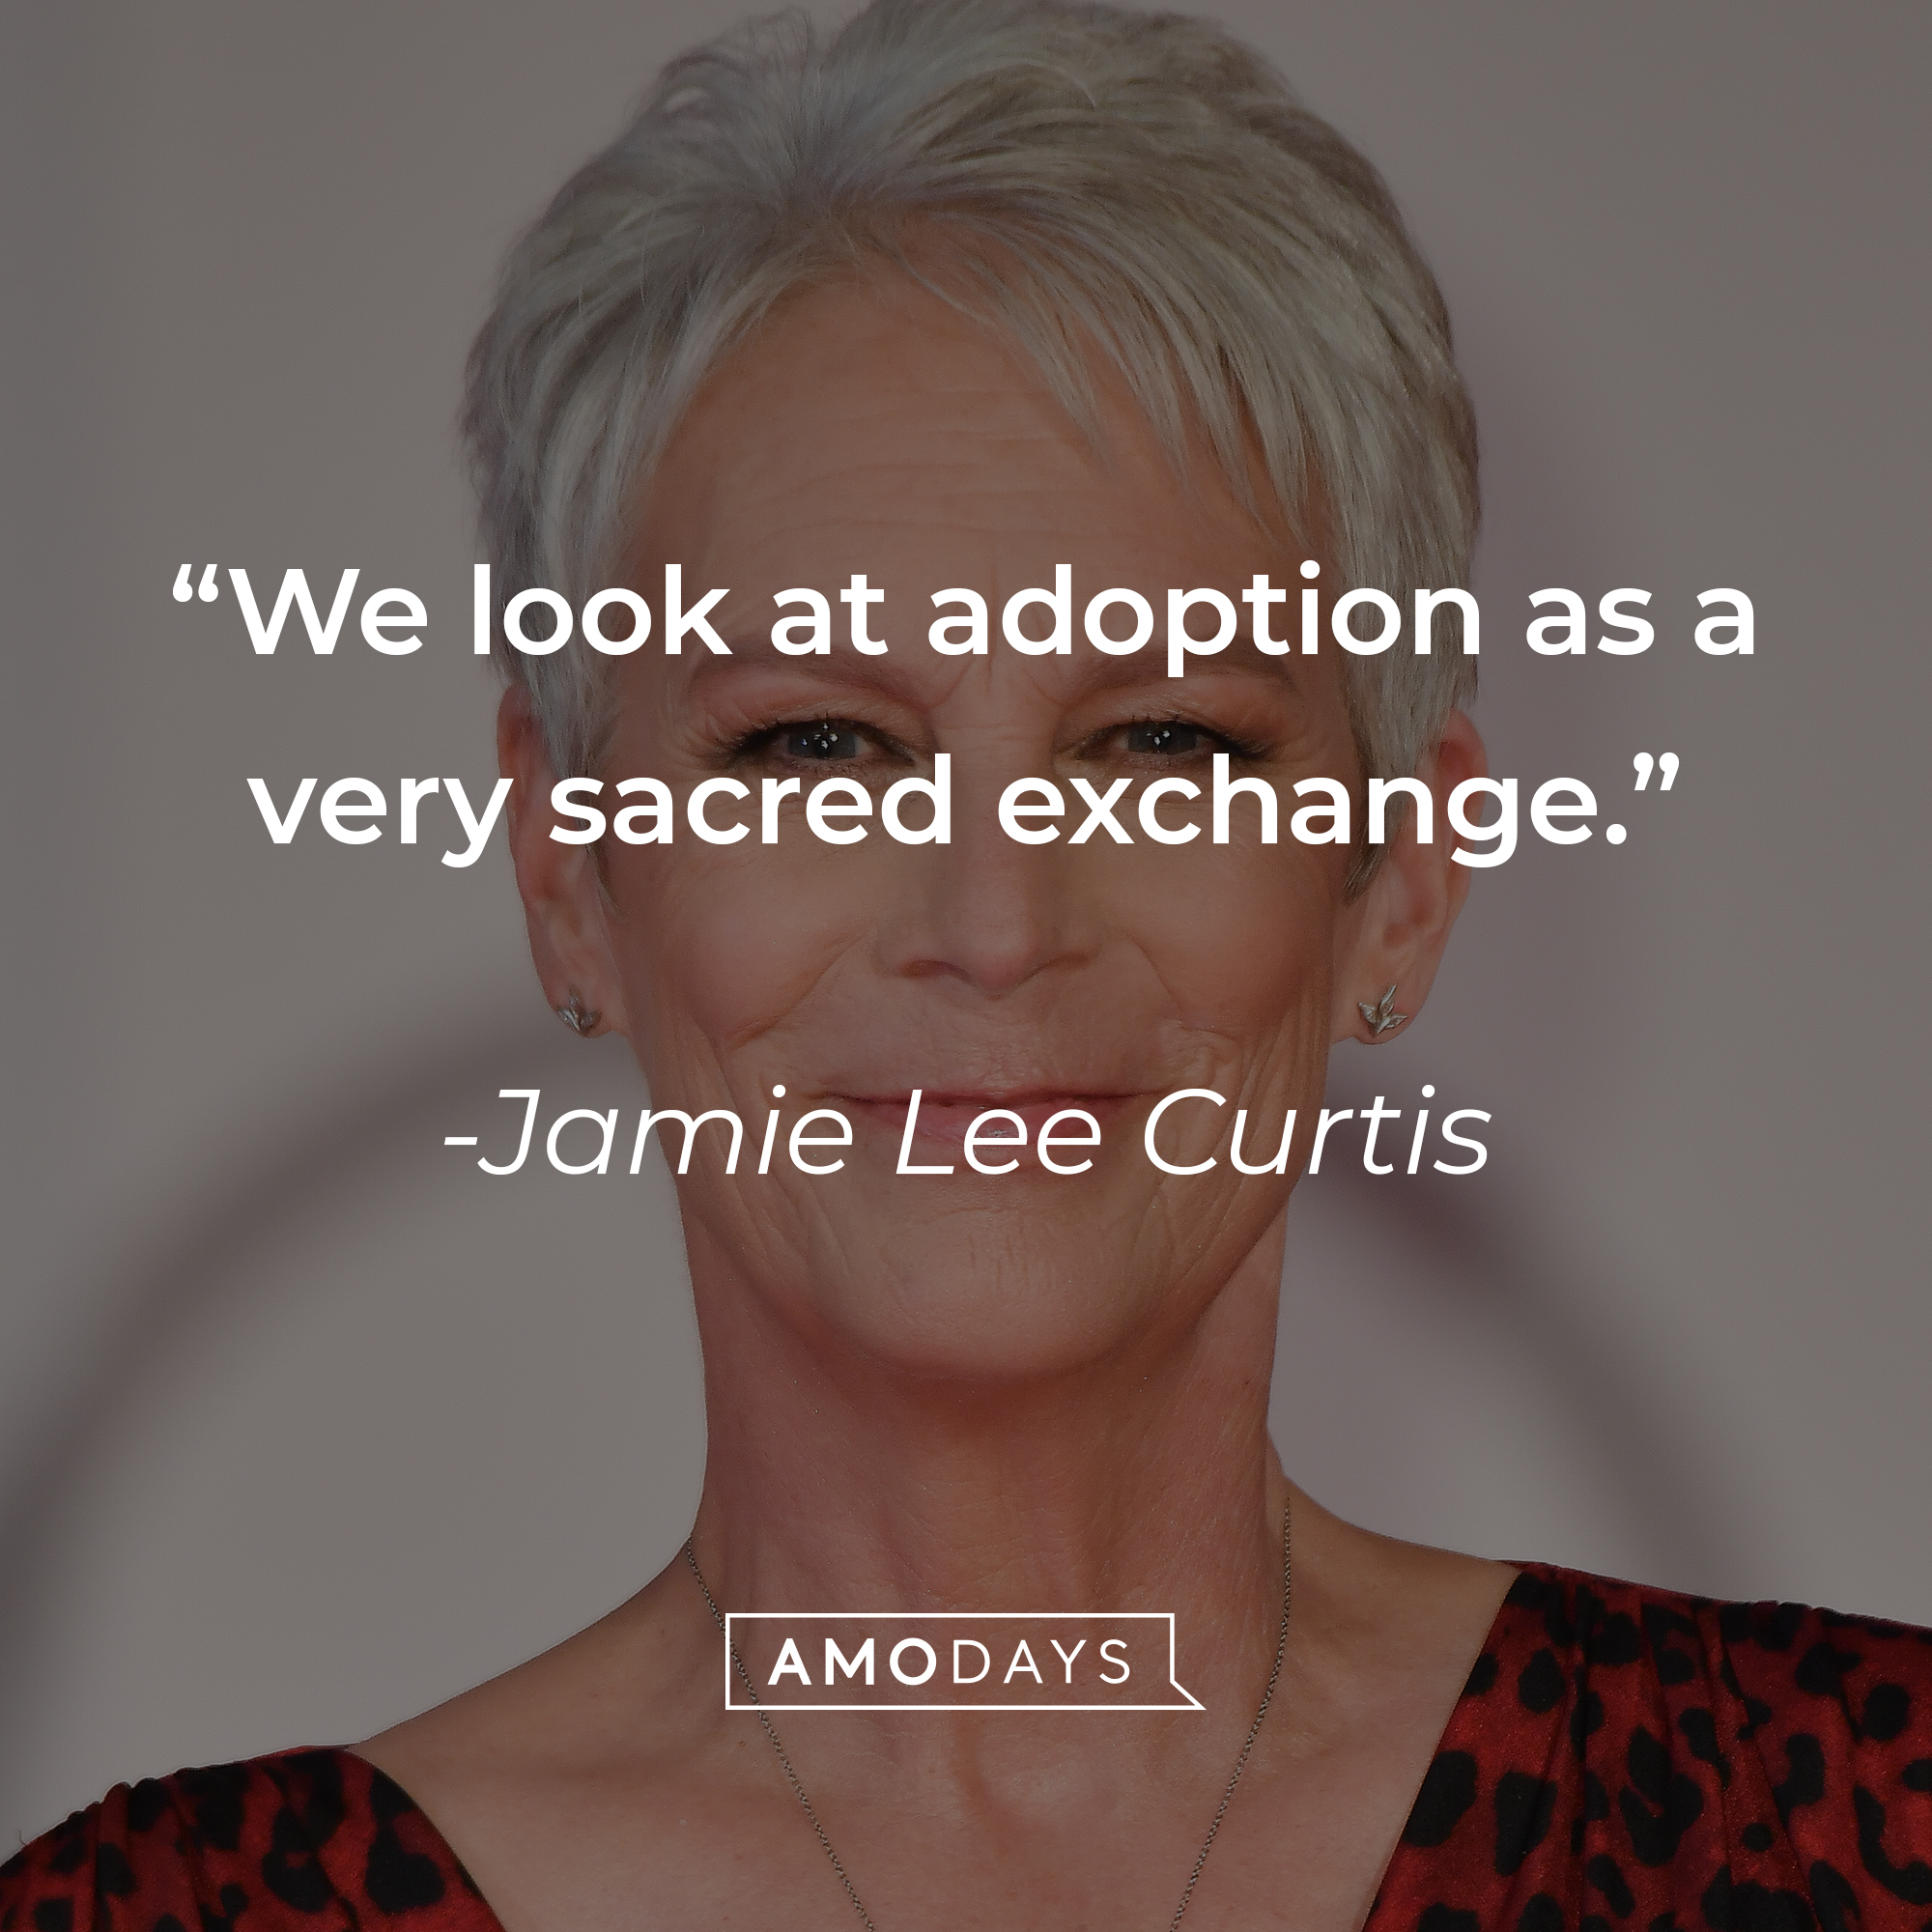 An image of Jamie Lee Curtis, with her quote: “We look at adoption as a very sacred exchange.” | Source: Getty Images